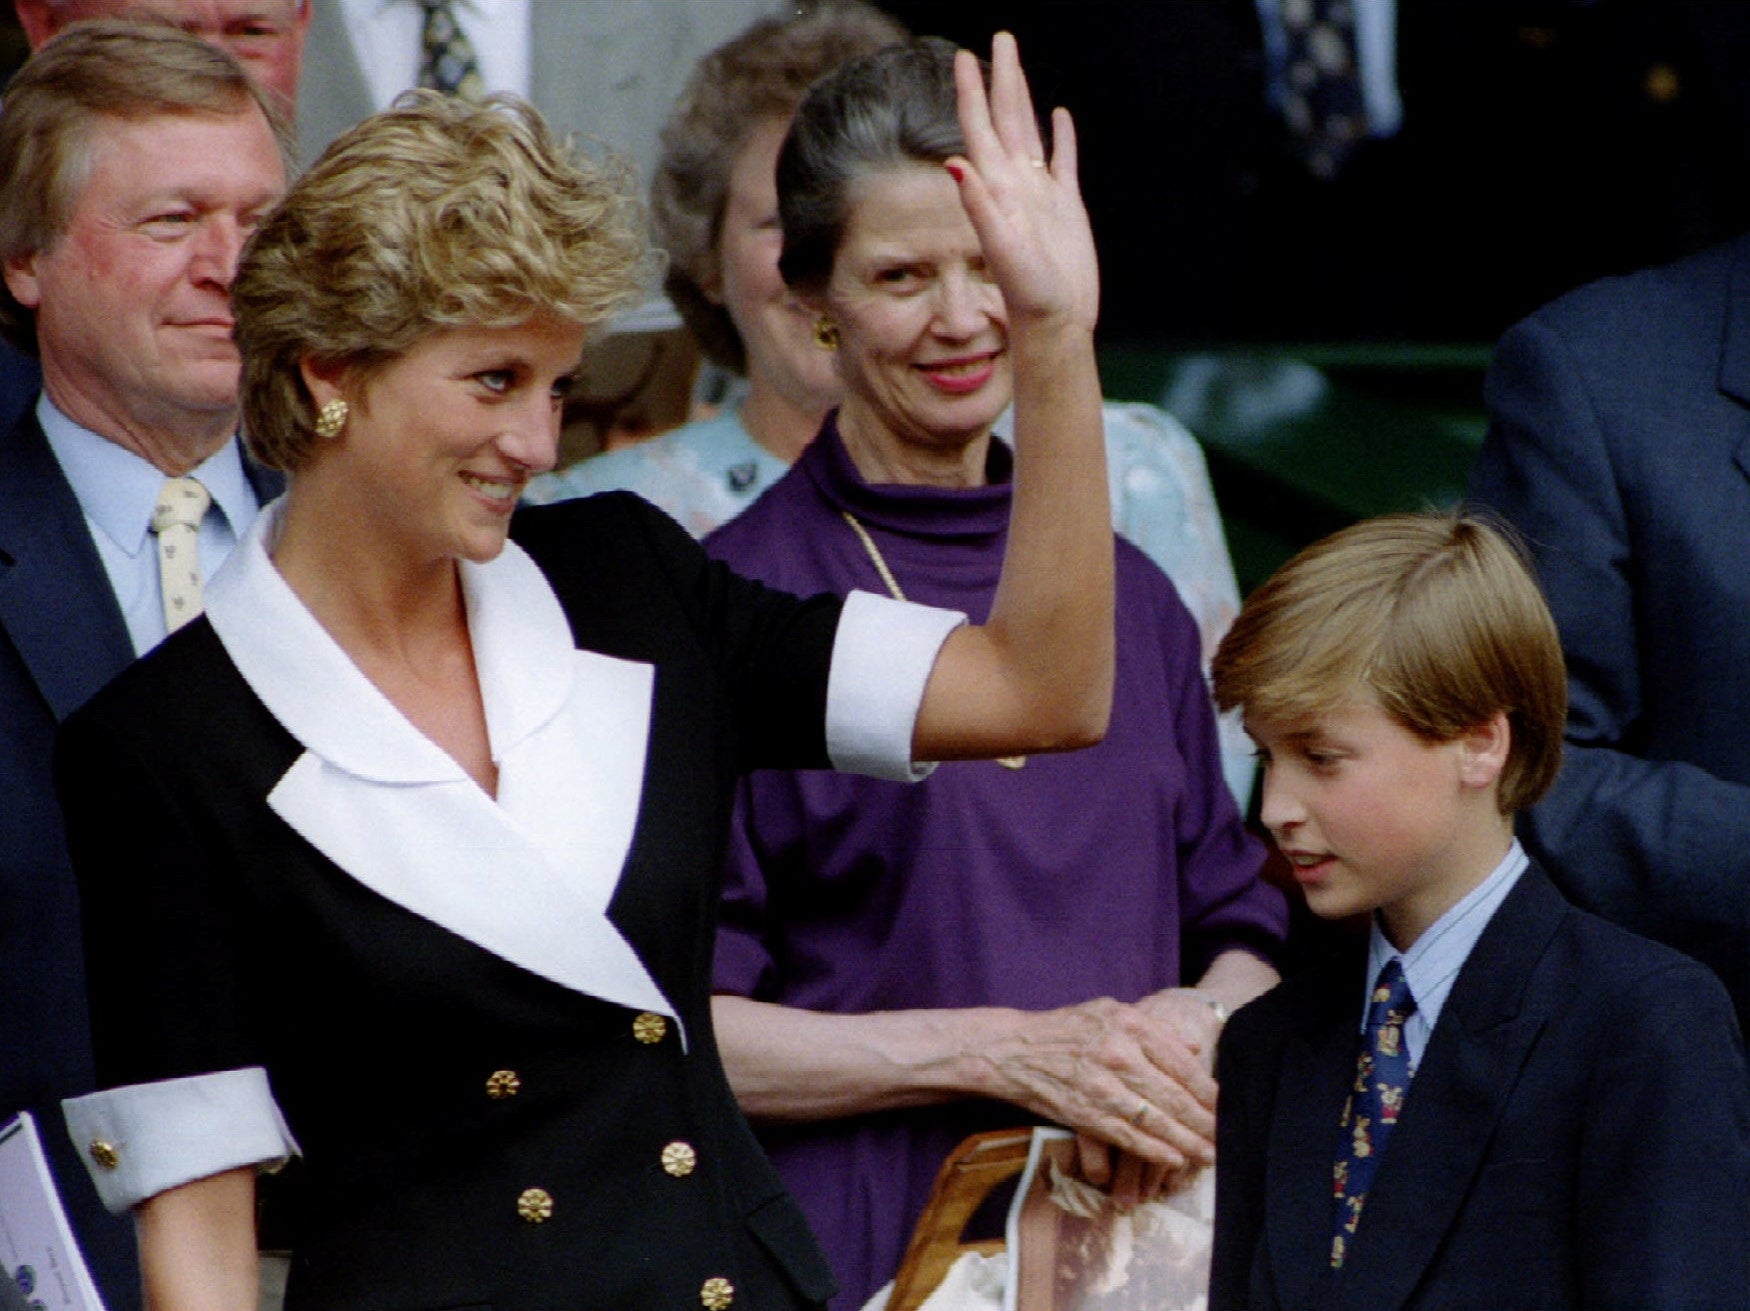 Diana, Princess of Wales, accompanied by Prince William, arrives at Wimbledon's Centre Court